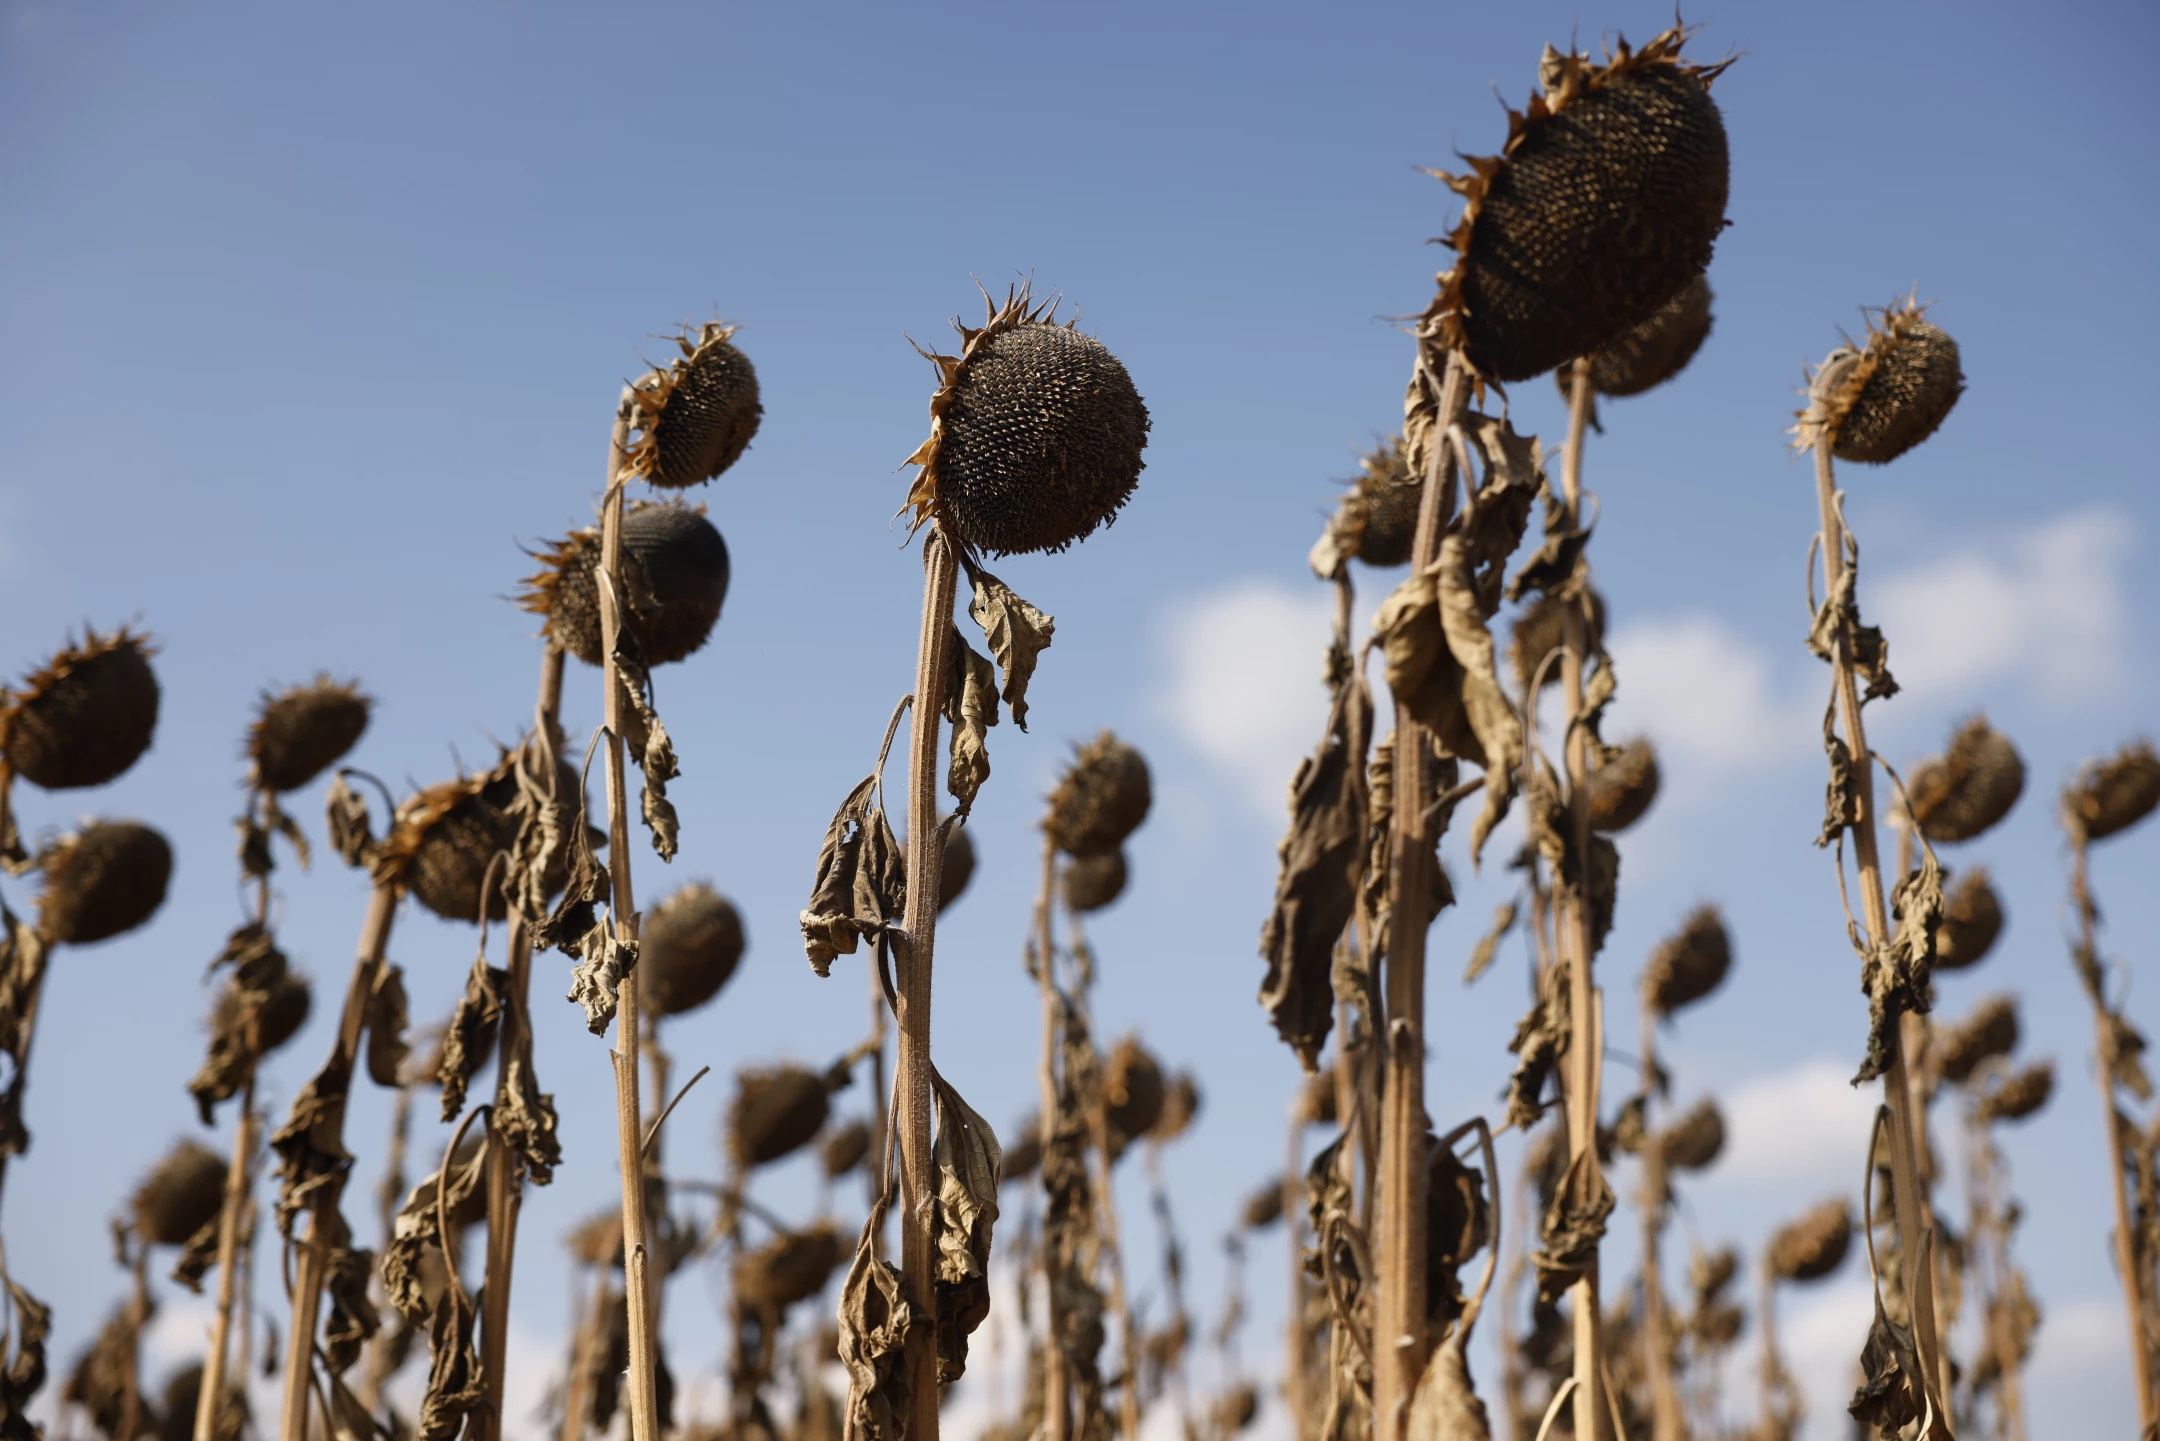 Sunflower fields are withered in the Kochersberg region of eastern France, as Europe weathers a drought in 2022 that has fueled forest fires, dried up rivers, and devastated crops. Photo: Jean-Francois Badias / Associated Press